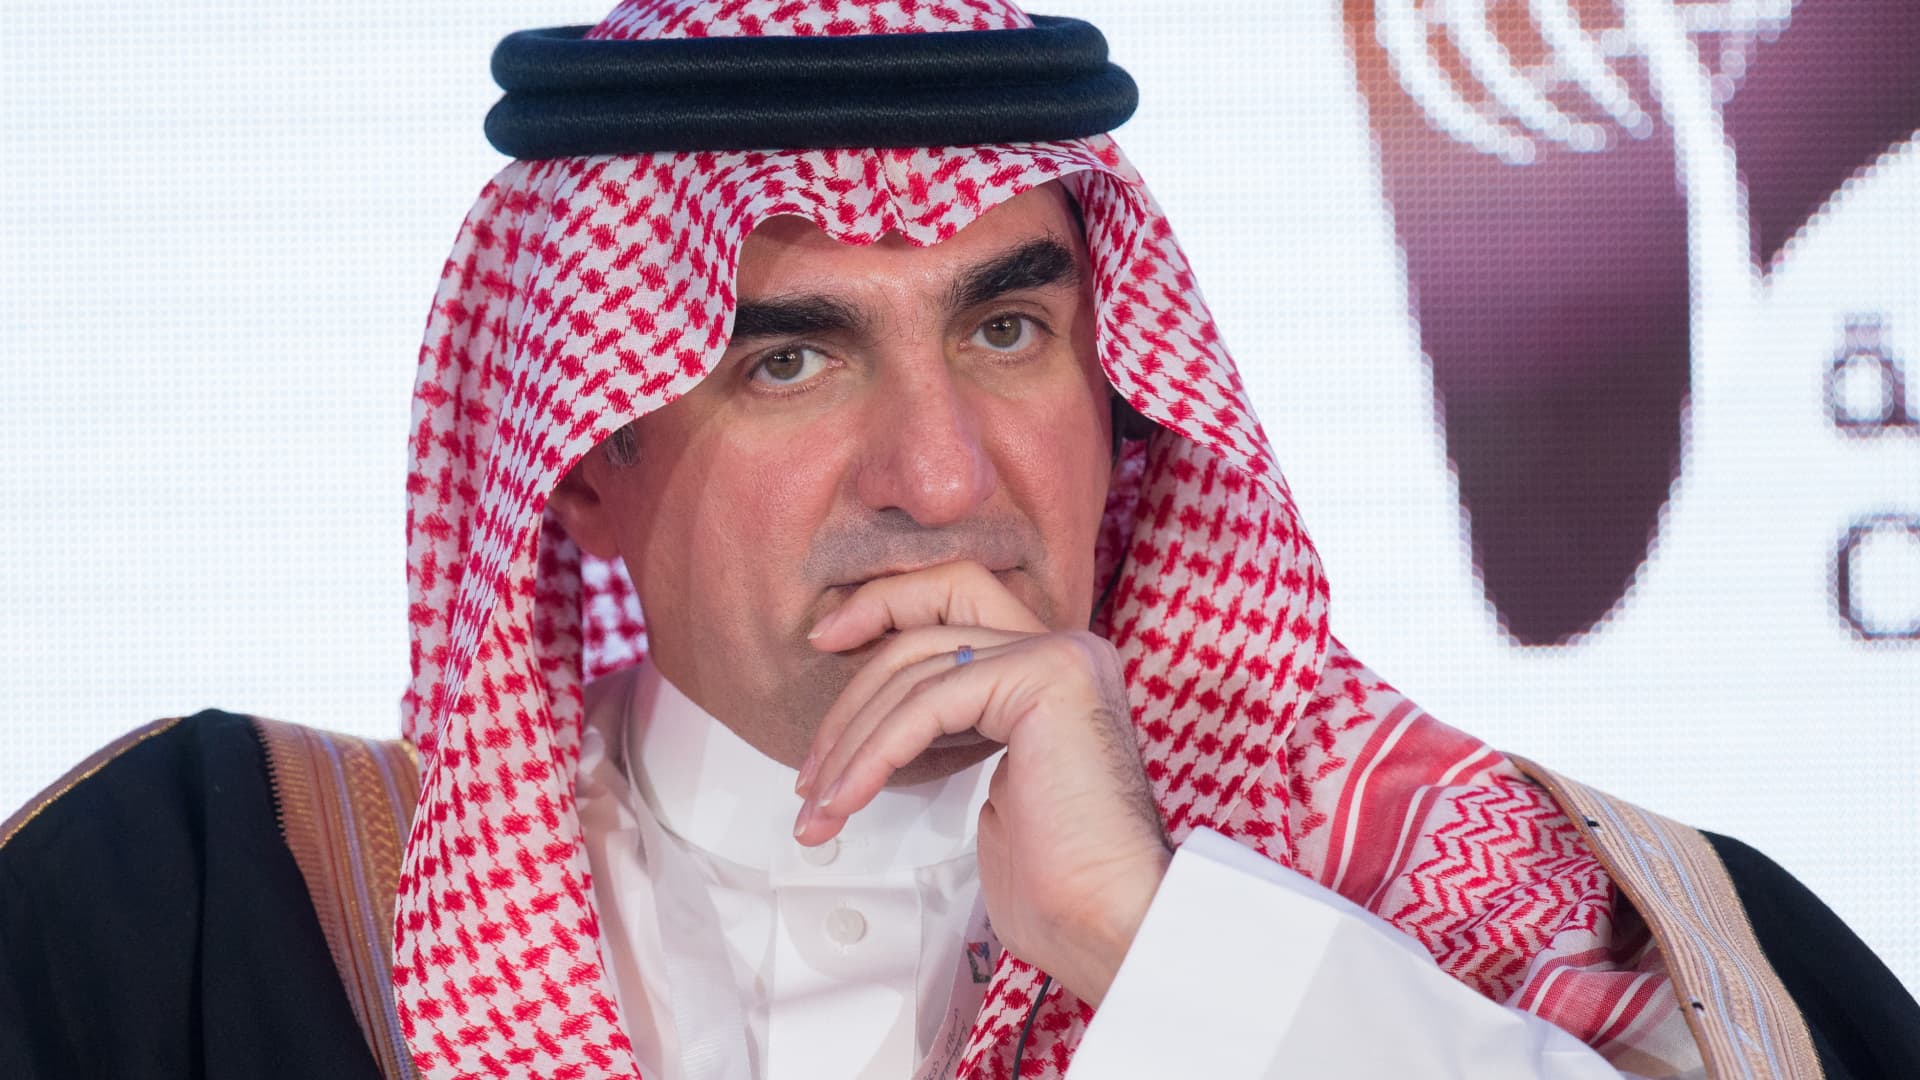 Saudi Arabia reportedly in talks with VC firms like Andreessen Horowitz to create mammoth $40 billion AI fund